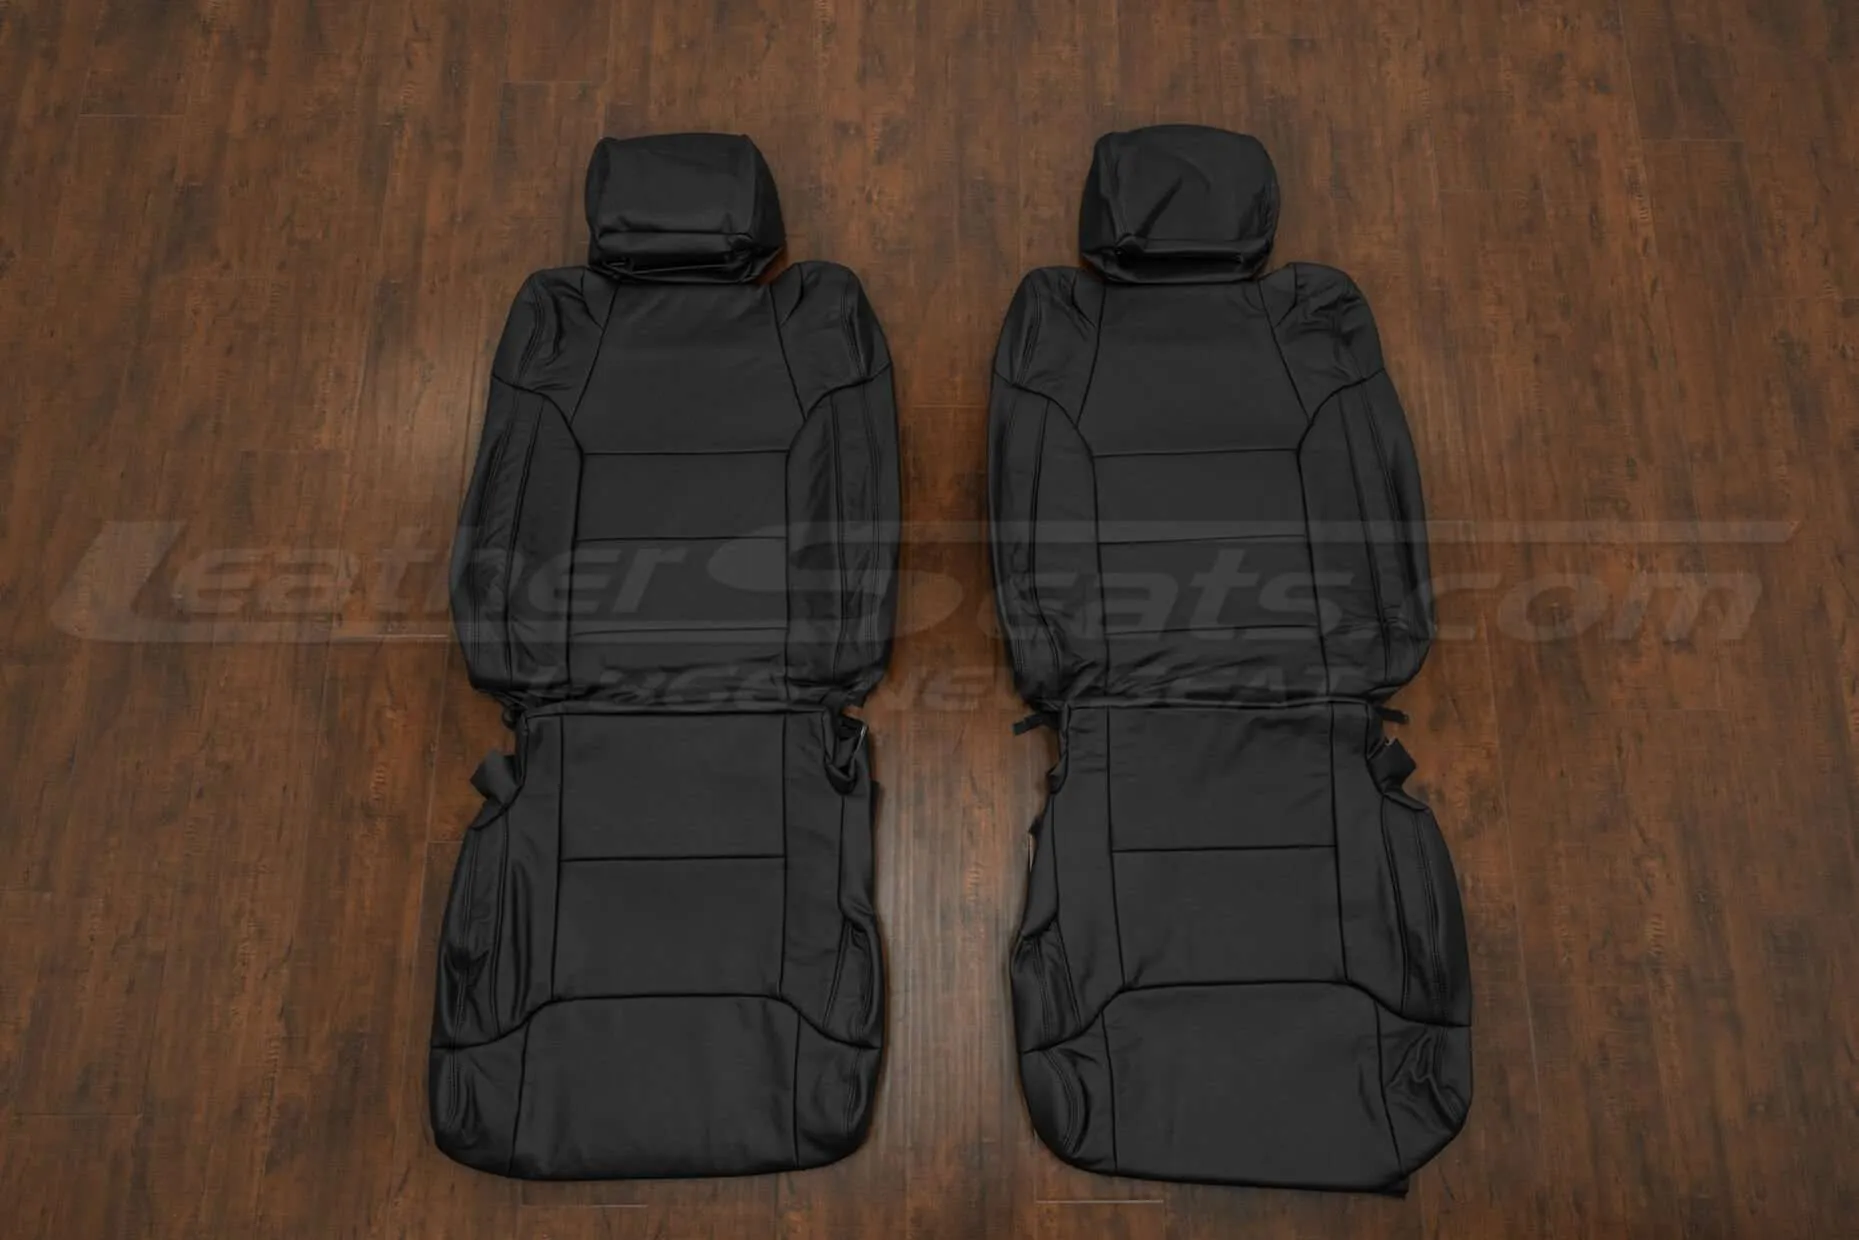 Toyota Tundra Leather Kit - Black - Front seat upholstery